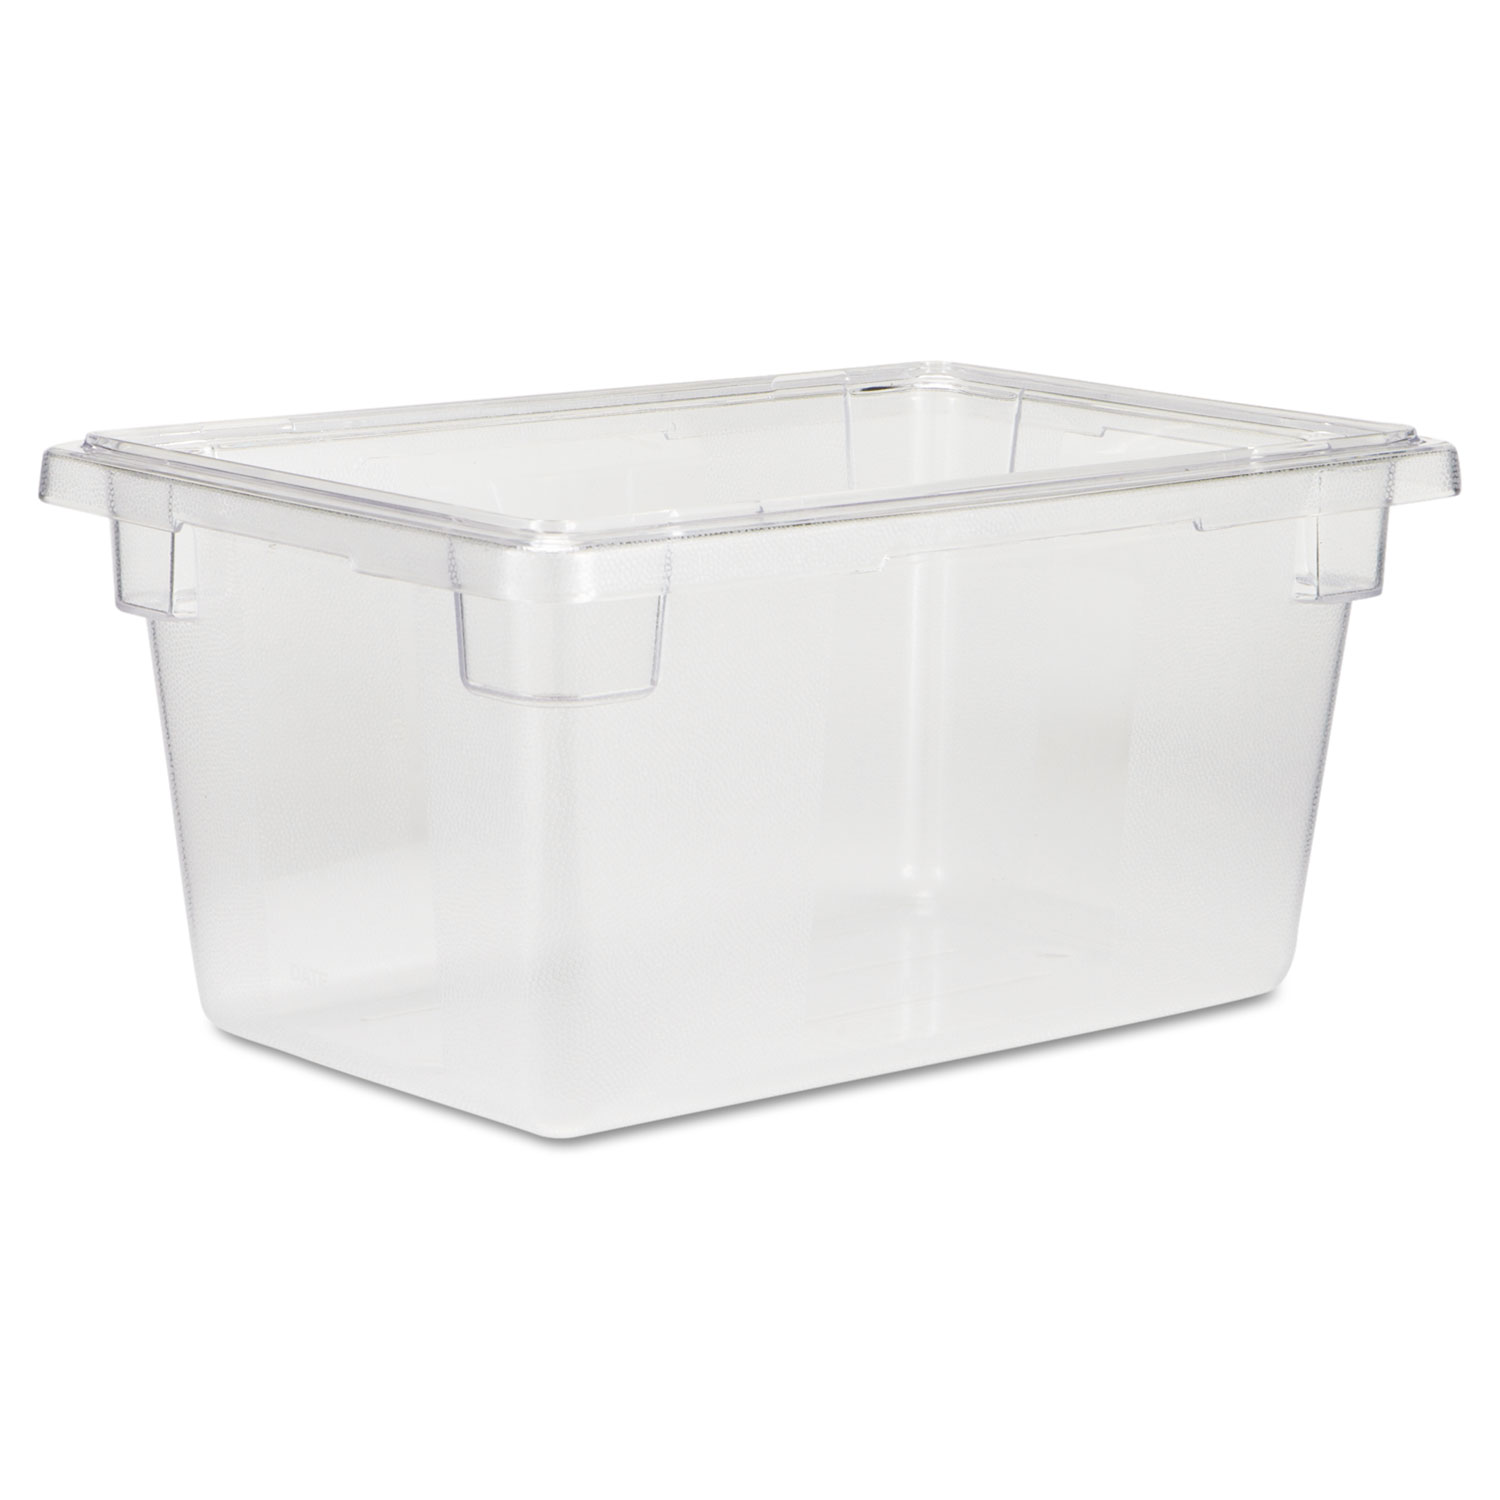  Rubbermaid Commercial FG330400CLR Food/Tote Boxes, 5gal, 12w x 18d x 9h, Clear (RCP3304CLE) 